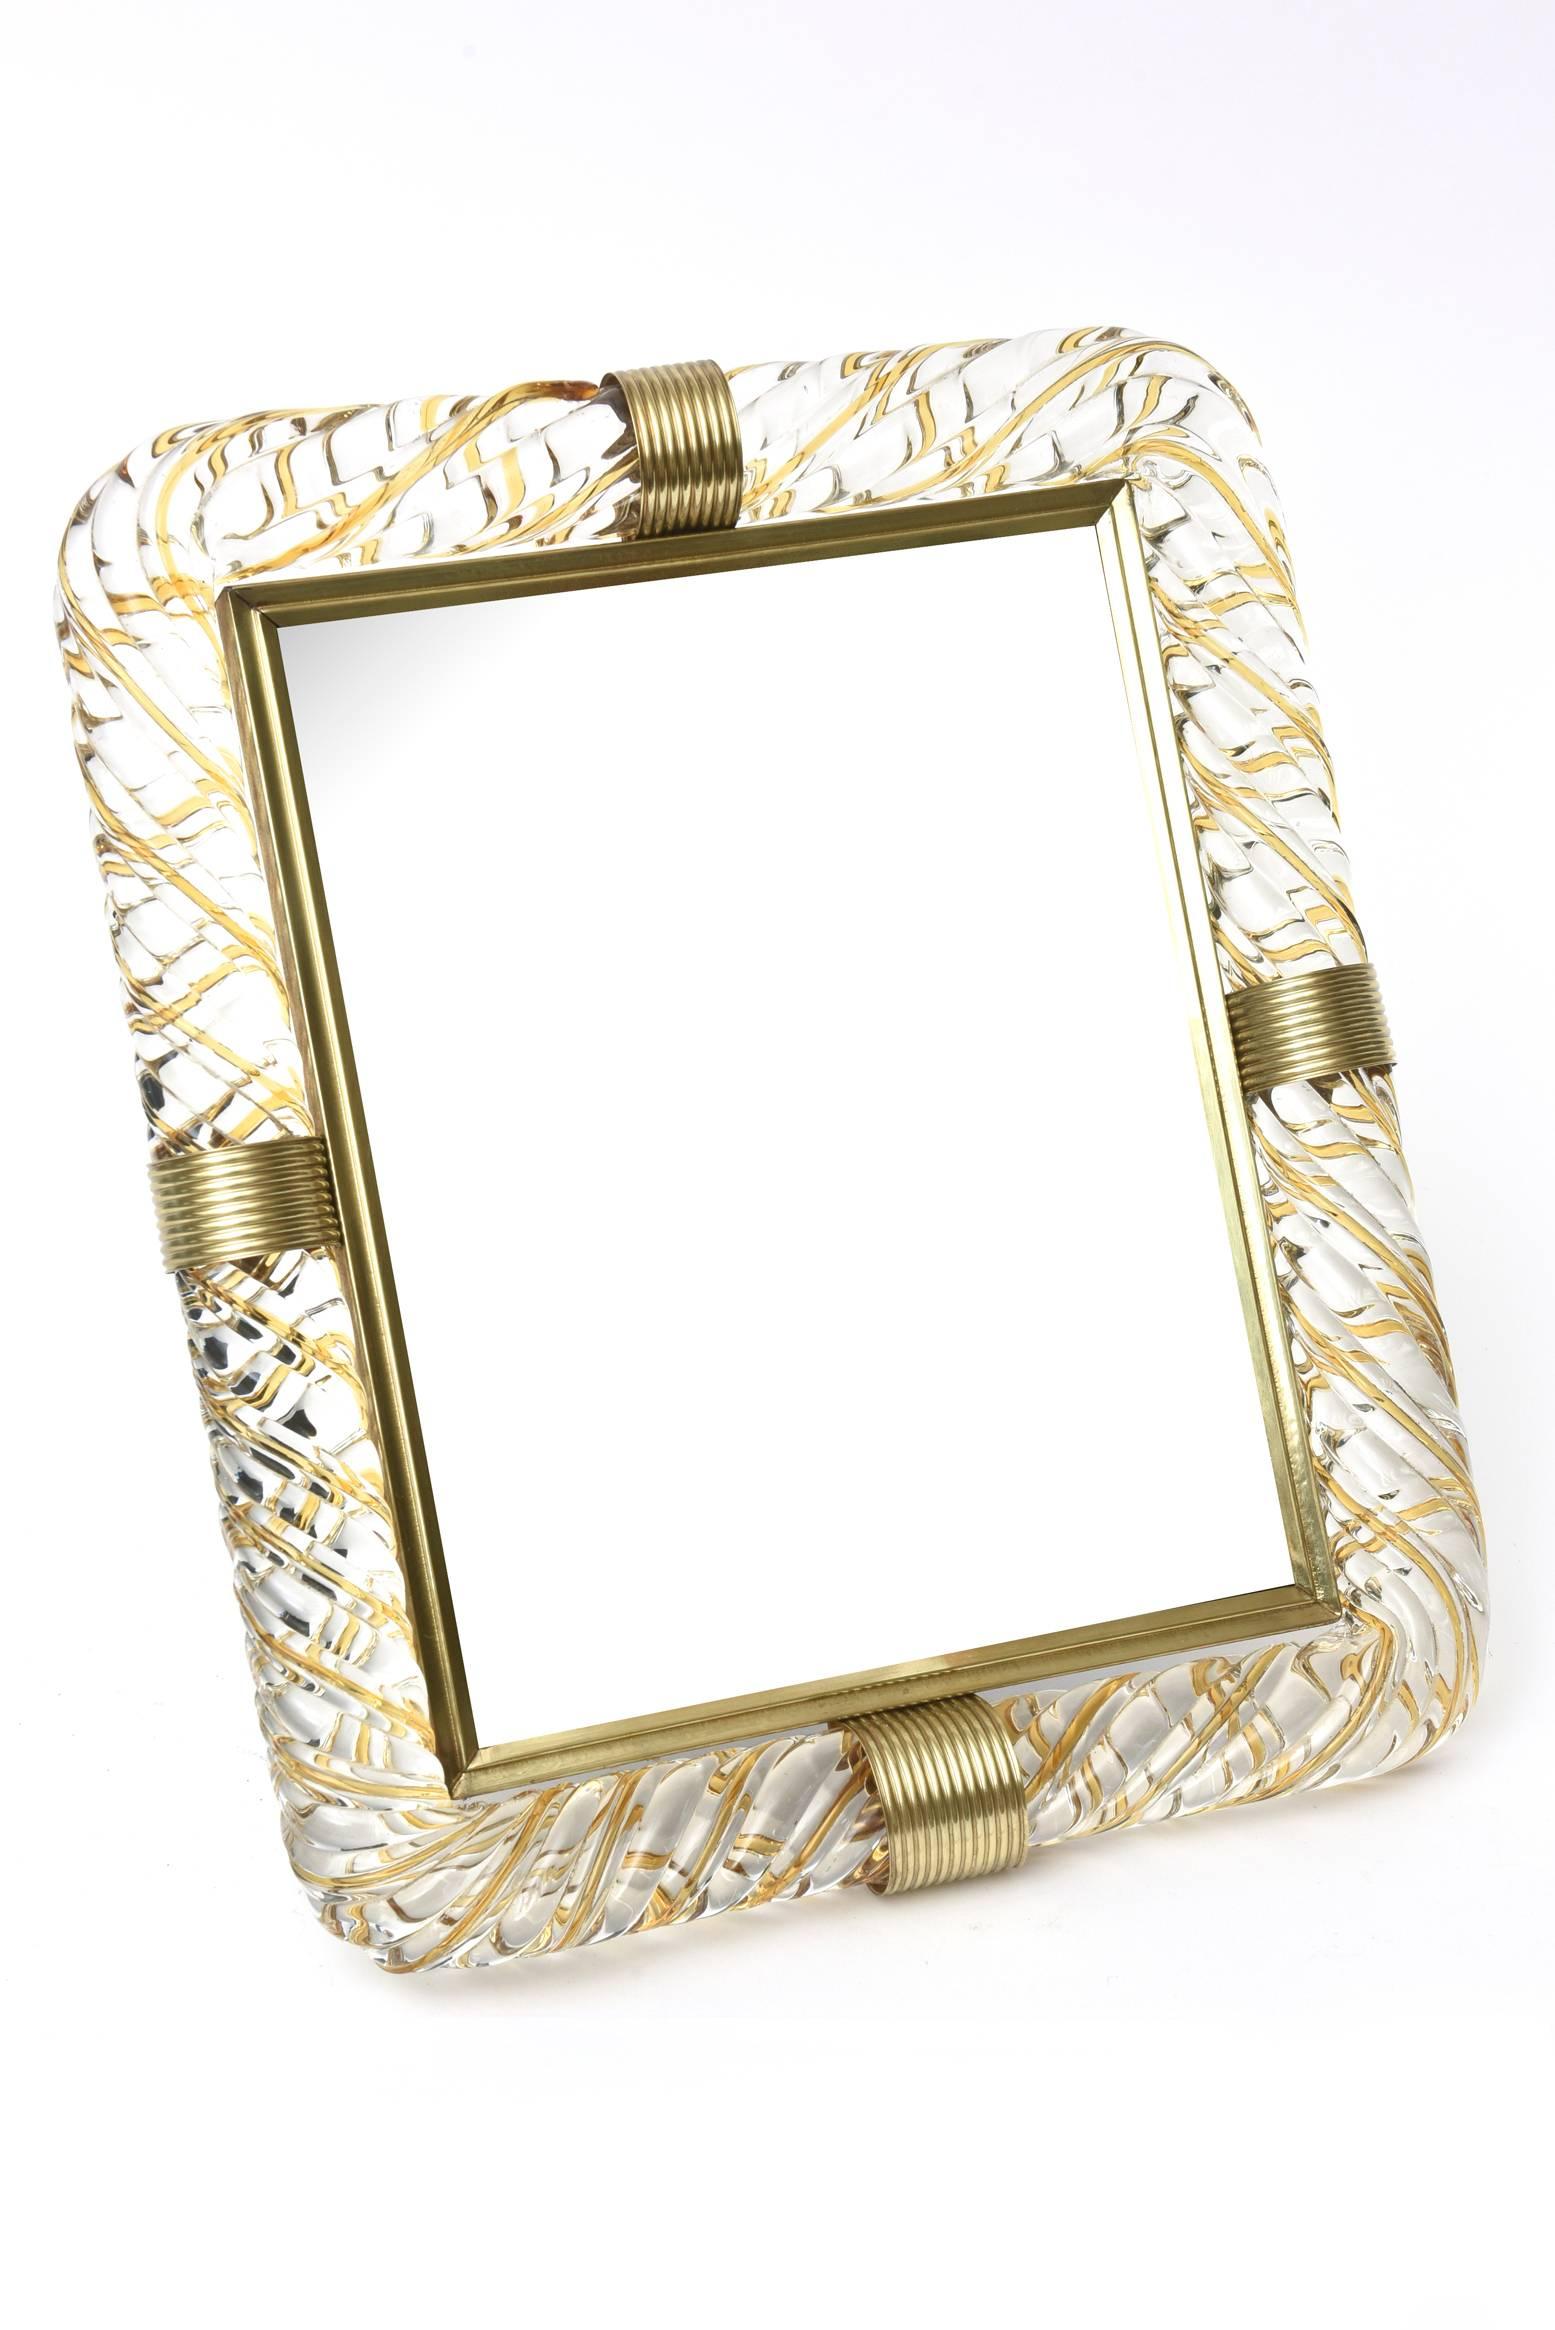 This gorgeous and heavy Italian vintage Murano glass and brass picture frame is the work of Barovier e Toso. The four brass thick rings have been polished. It has amber glass rolled into the clear glass. The latticino technique and the rolled